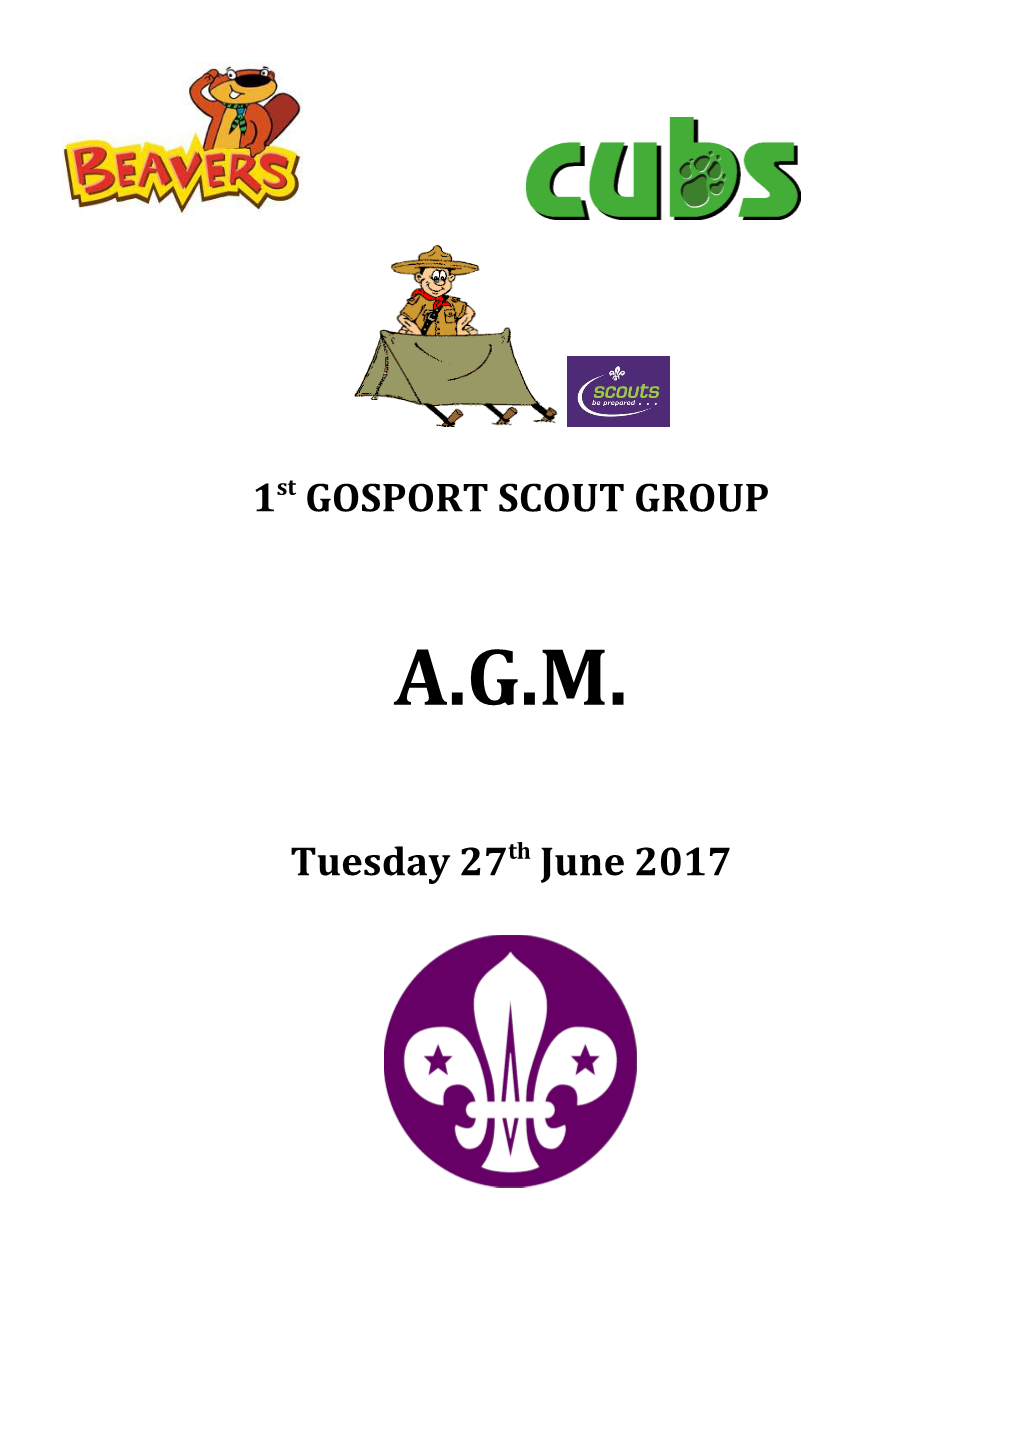 1St GOSPORT SCOUT GROUP